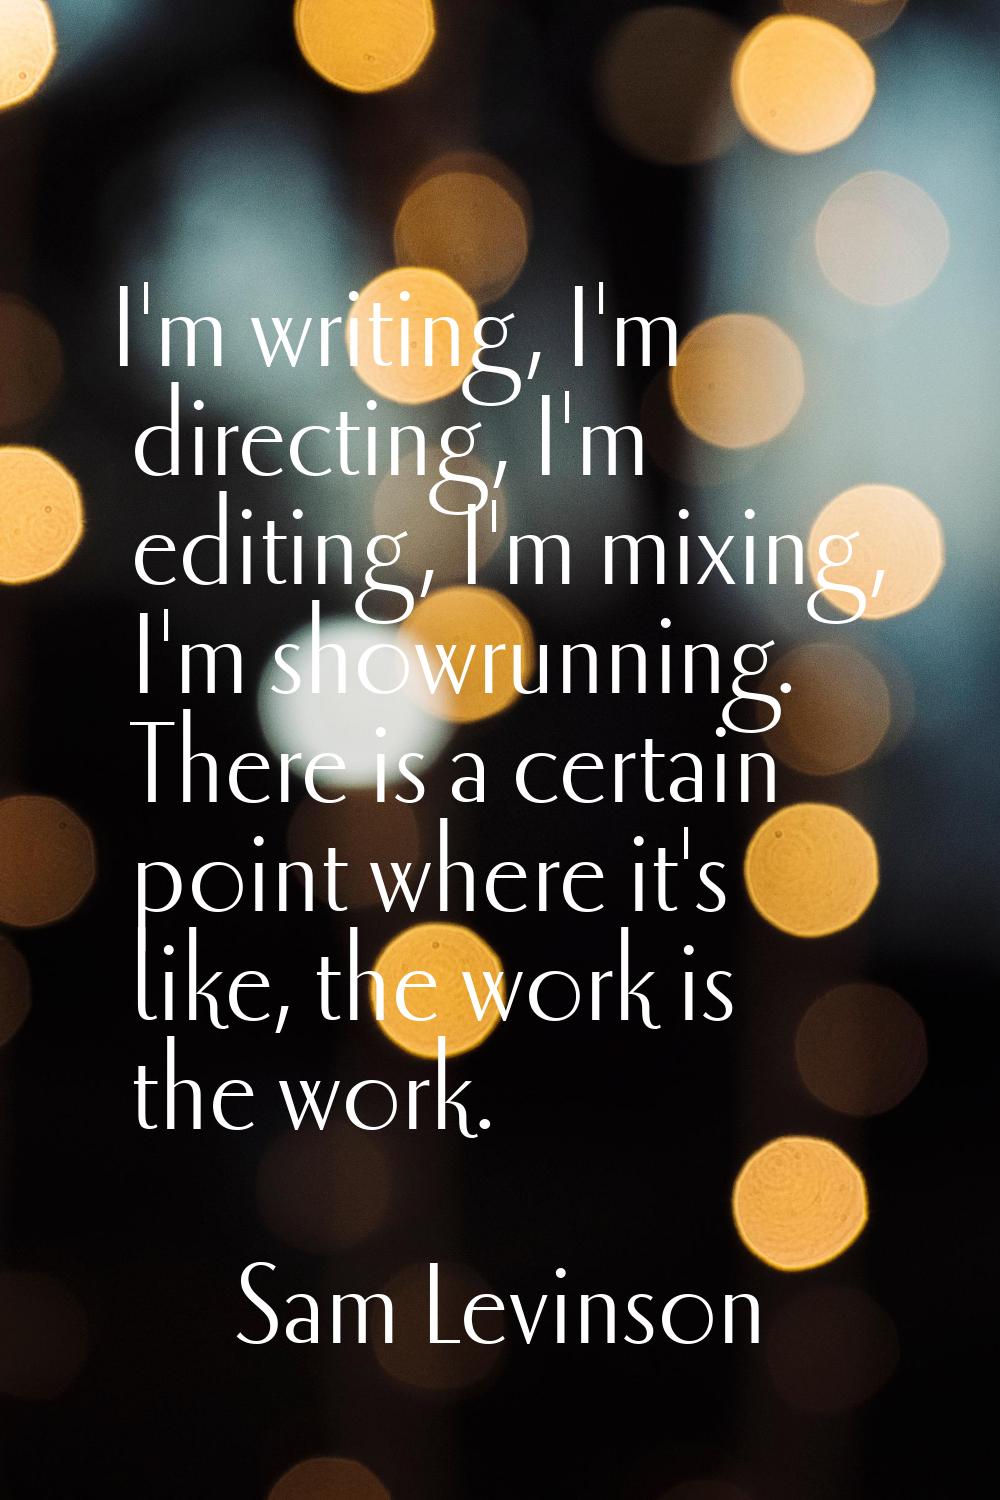 I'm writing, I'm directing, I'm editing, I'm mixing, I'm showrunning. There is a certain point wher